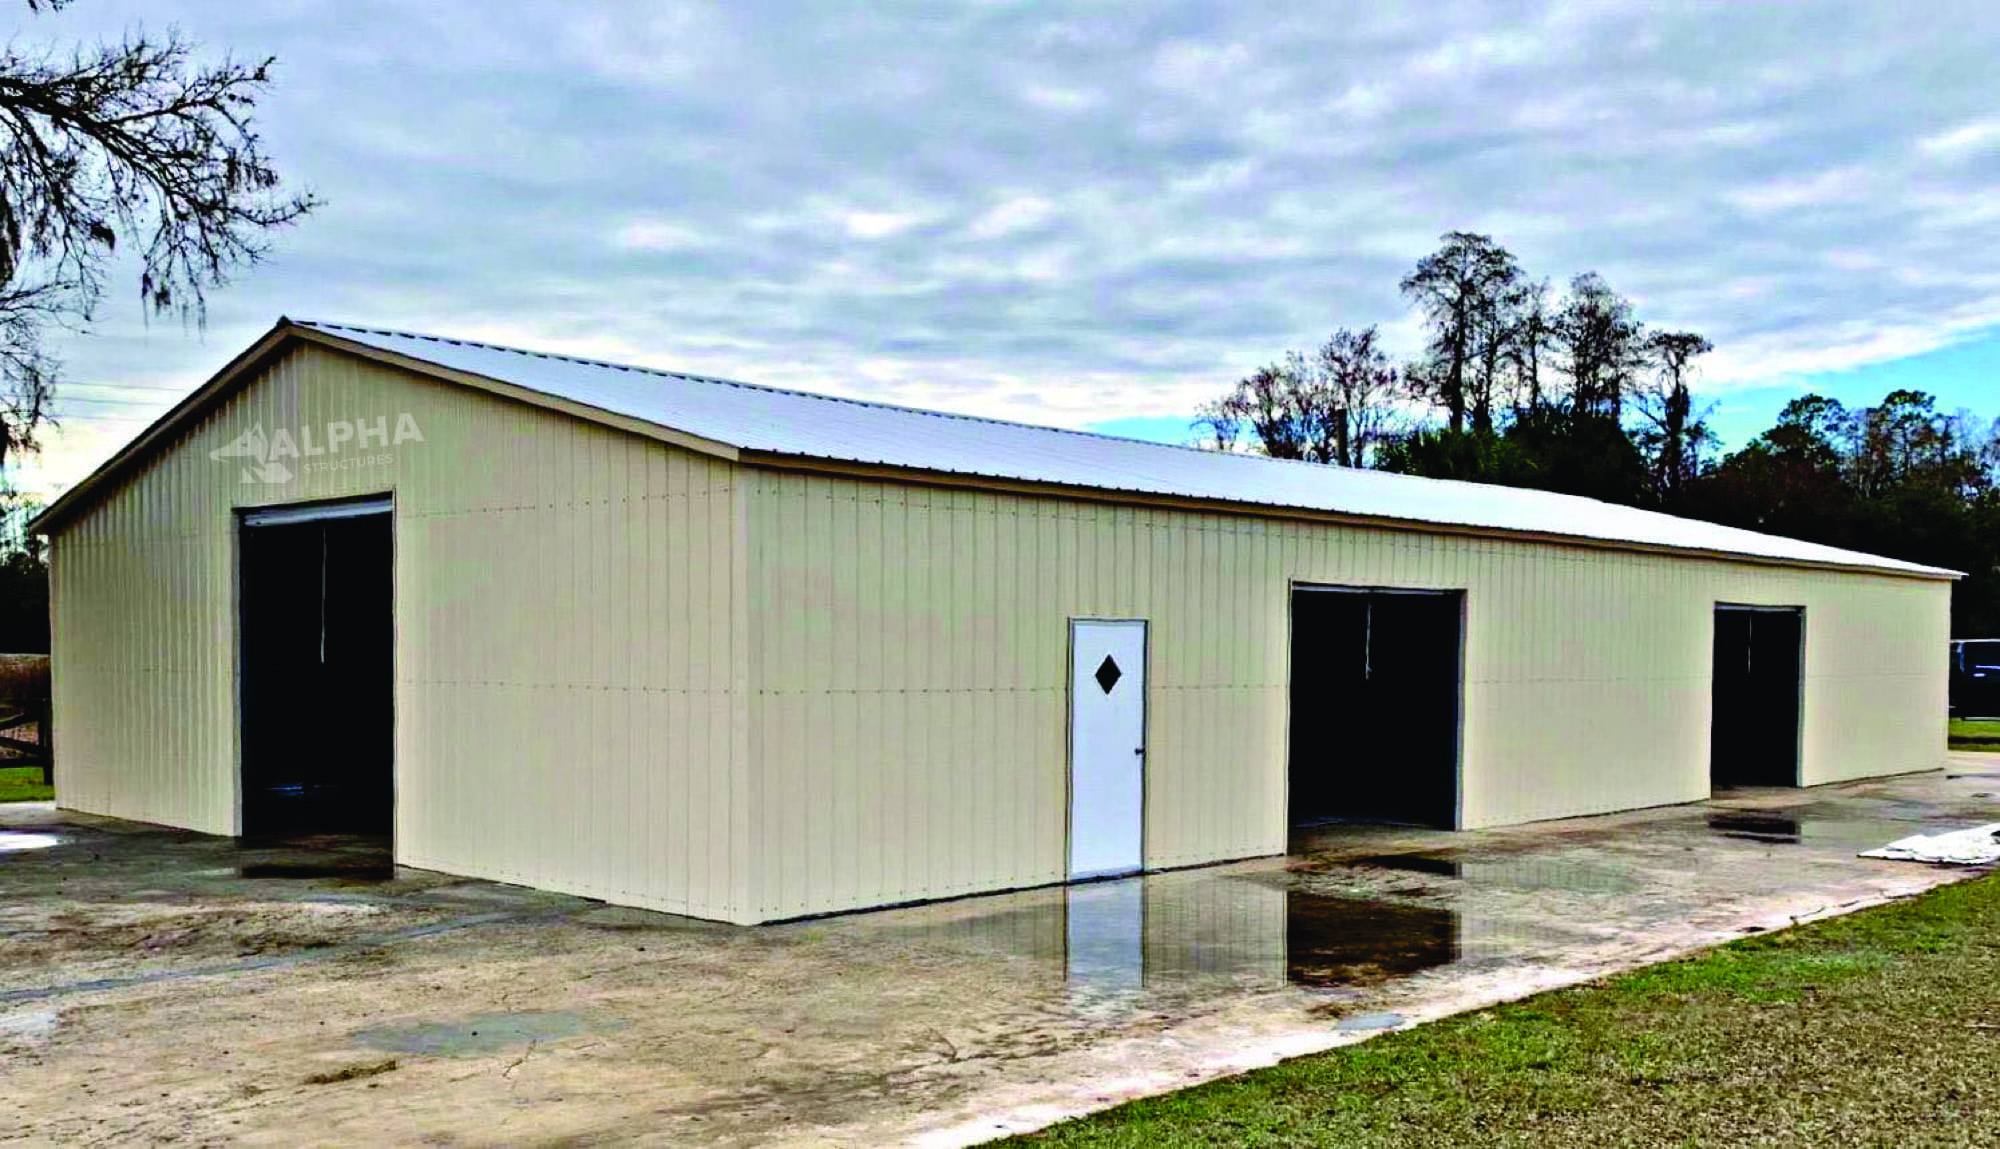 6 Steps to Plan Your Commercial Metal Building